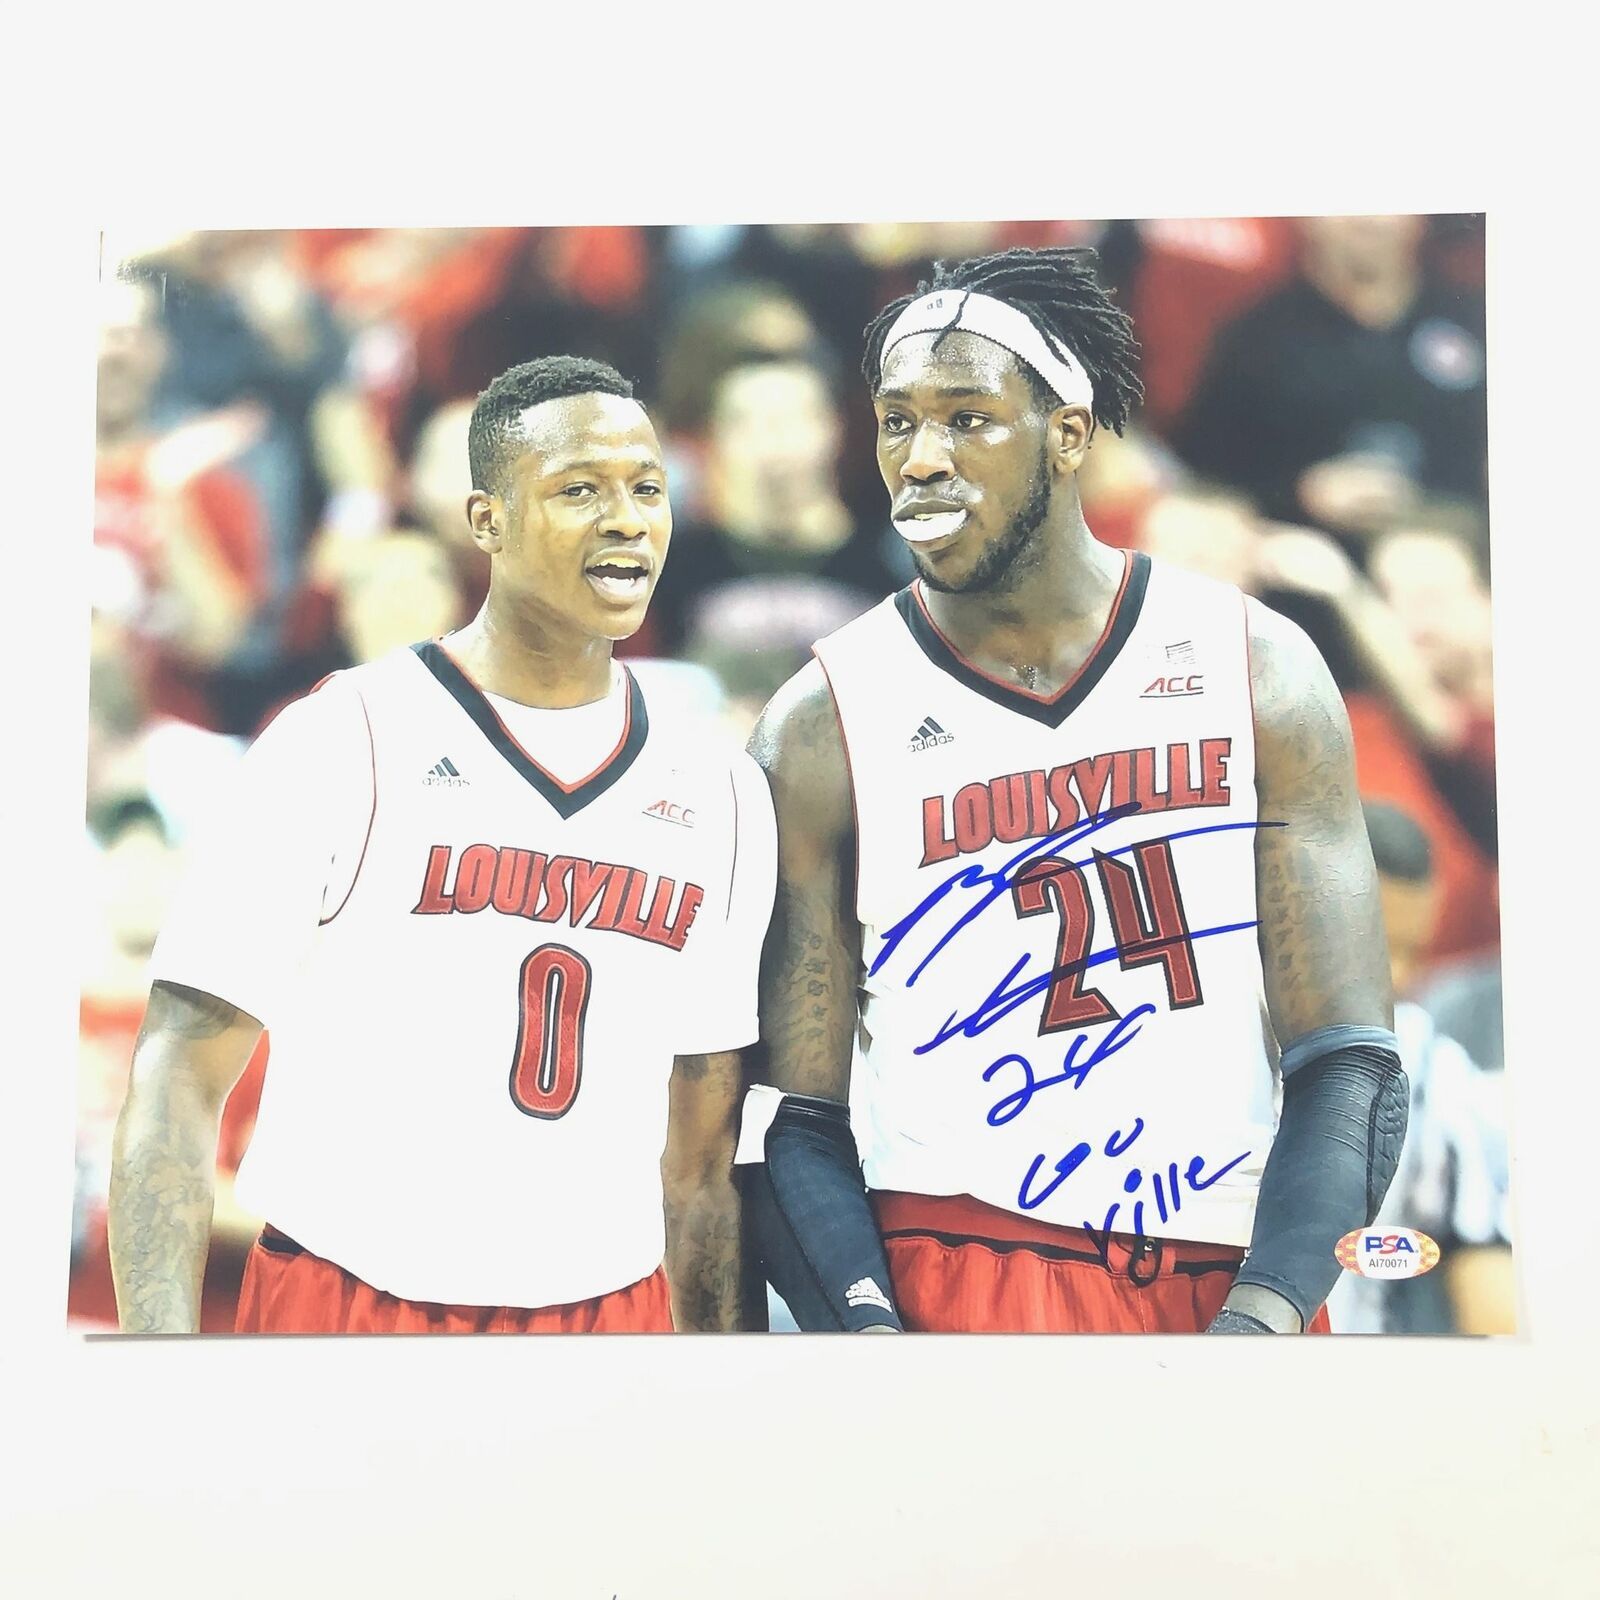 Primary image for Montrezl Harrell signed 11x14 photo PSA/DNA Lakers Autographed